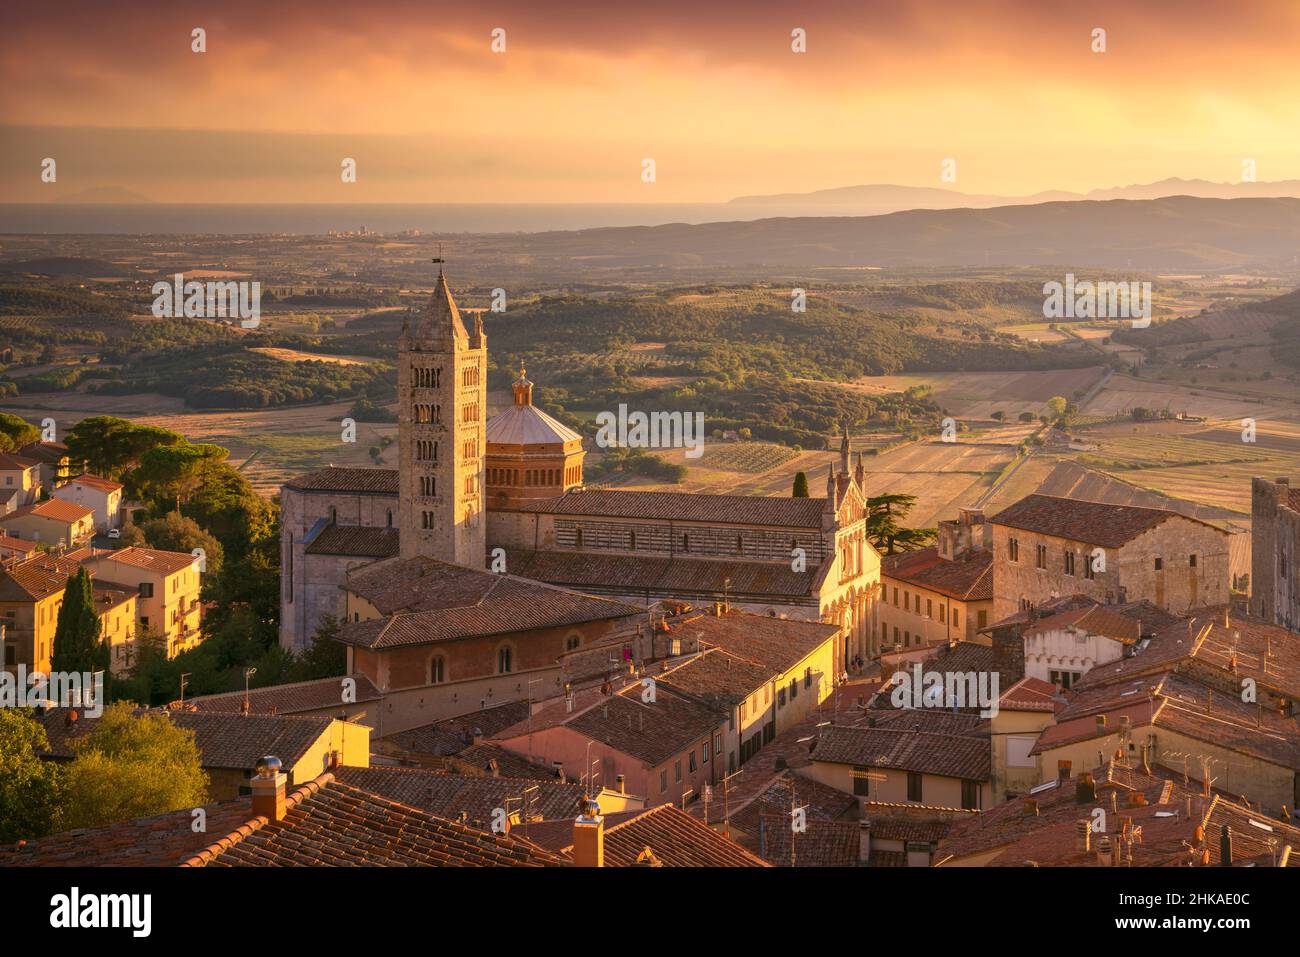 Massa Marittima old town and San Cerbone Duomo cathedral at sunset. Tuscany, Italy. Stock Photo